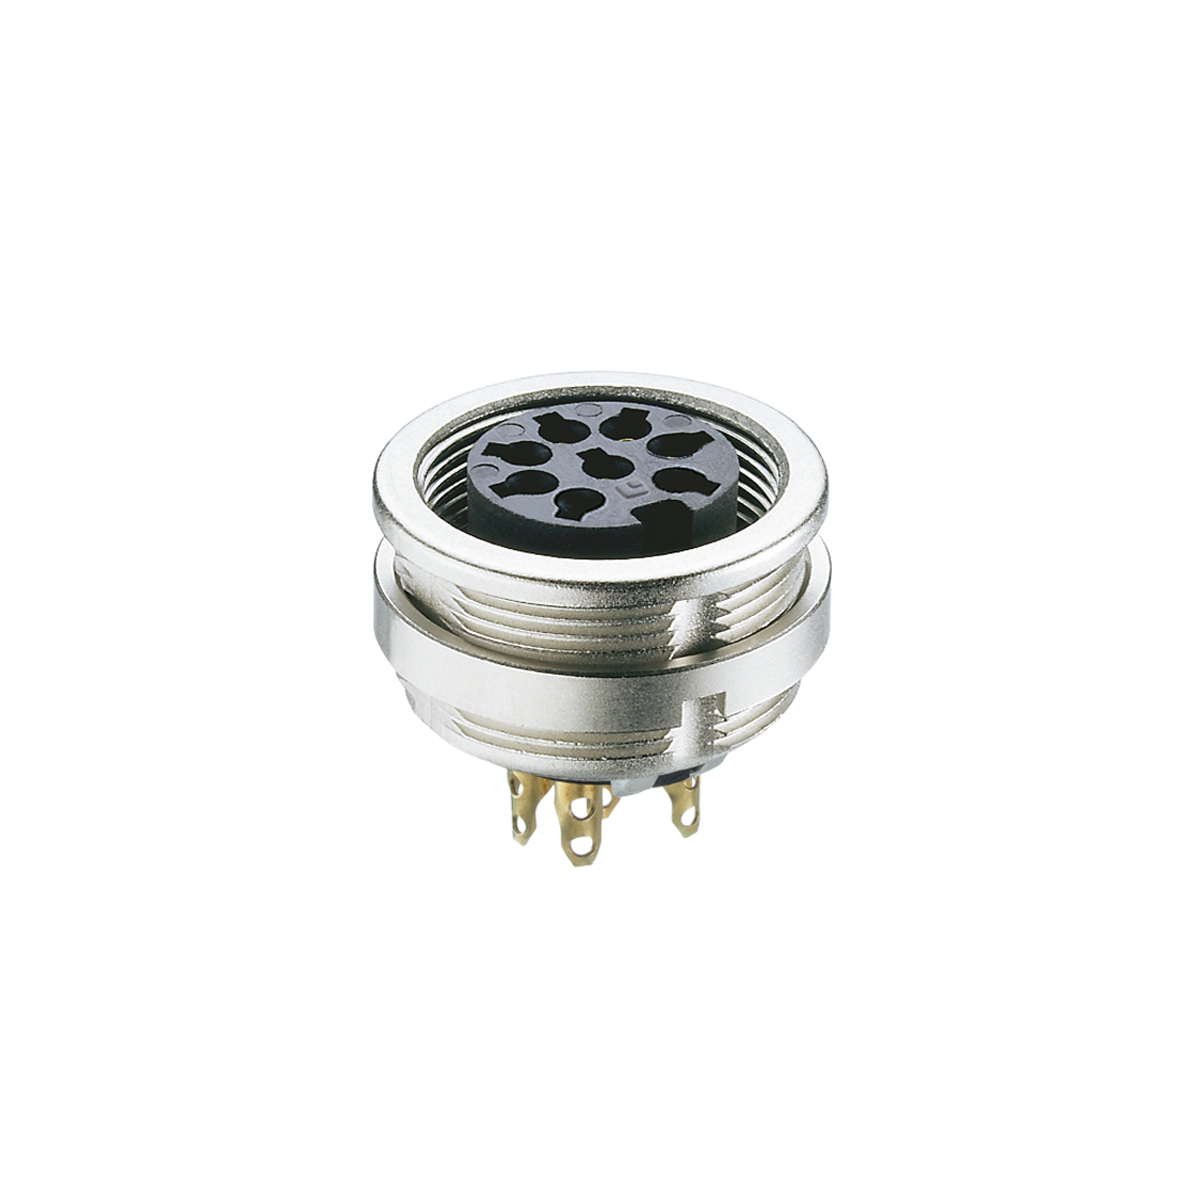 Lumberg: 0304-1 (Series 03 | Circular connectors with threaded joint M16 acc. to IEC 61076-2-106, IP40/IP68)